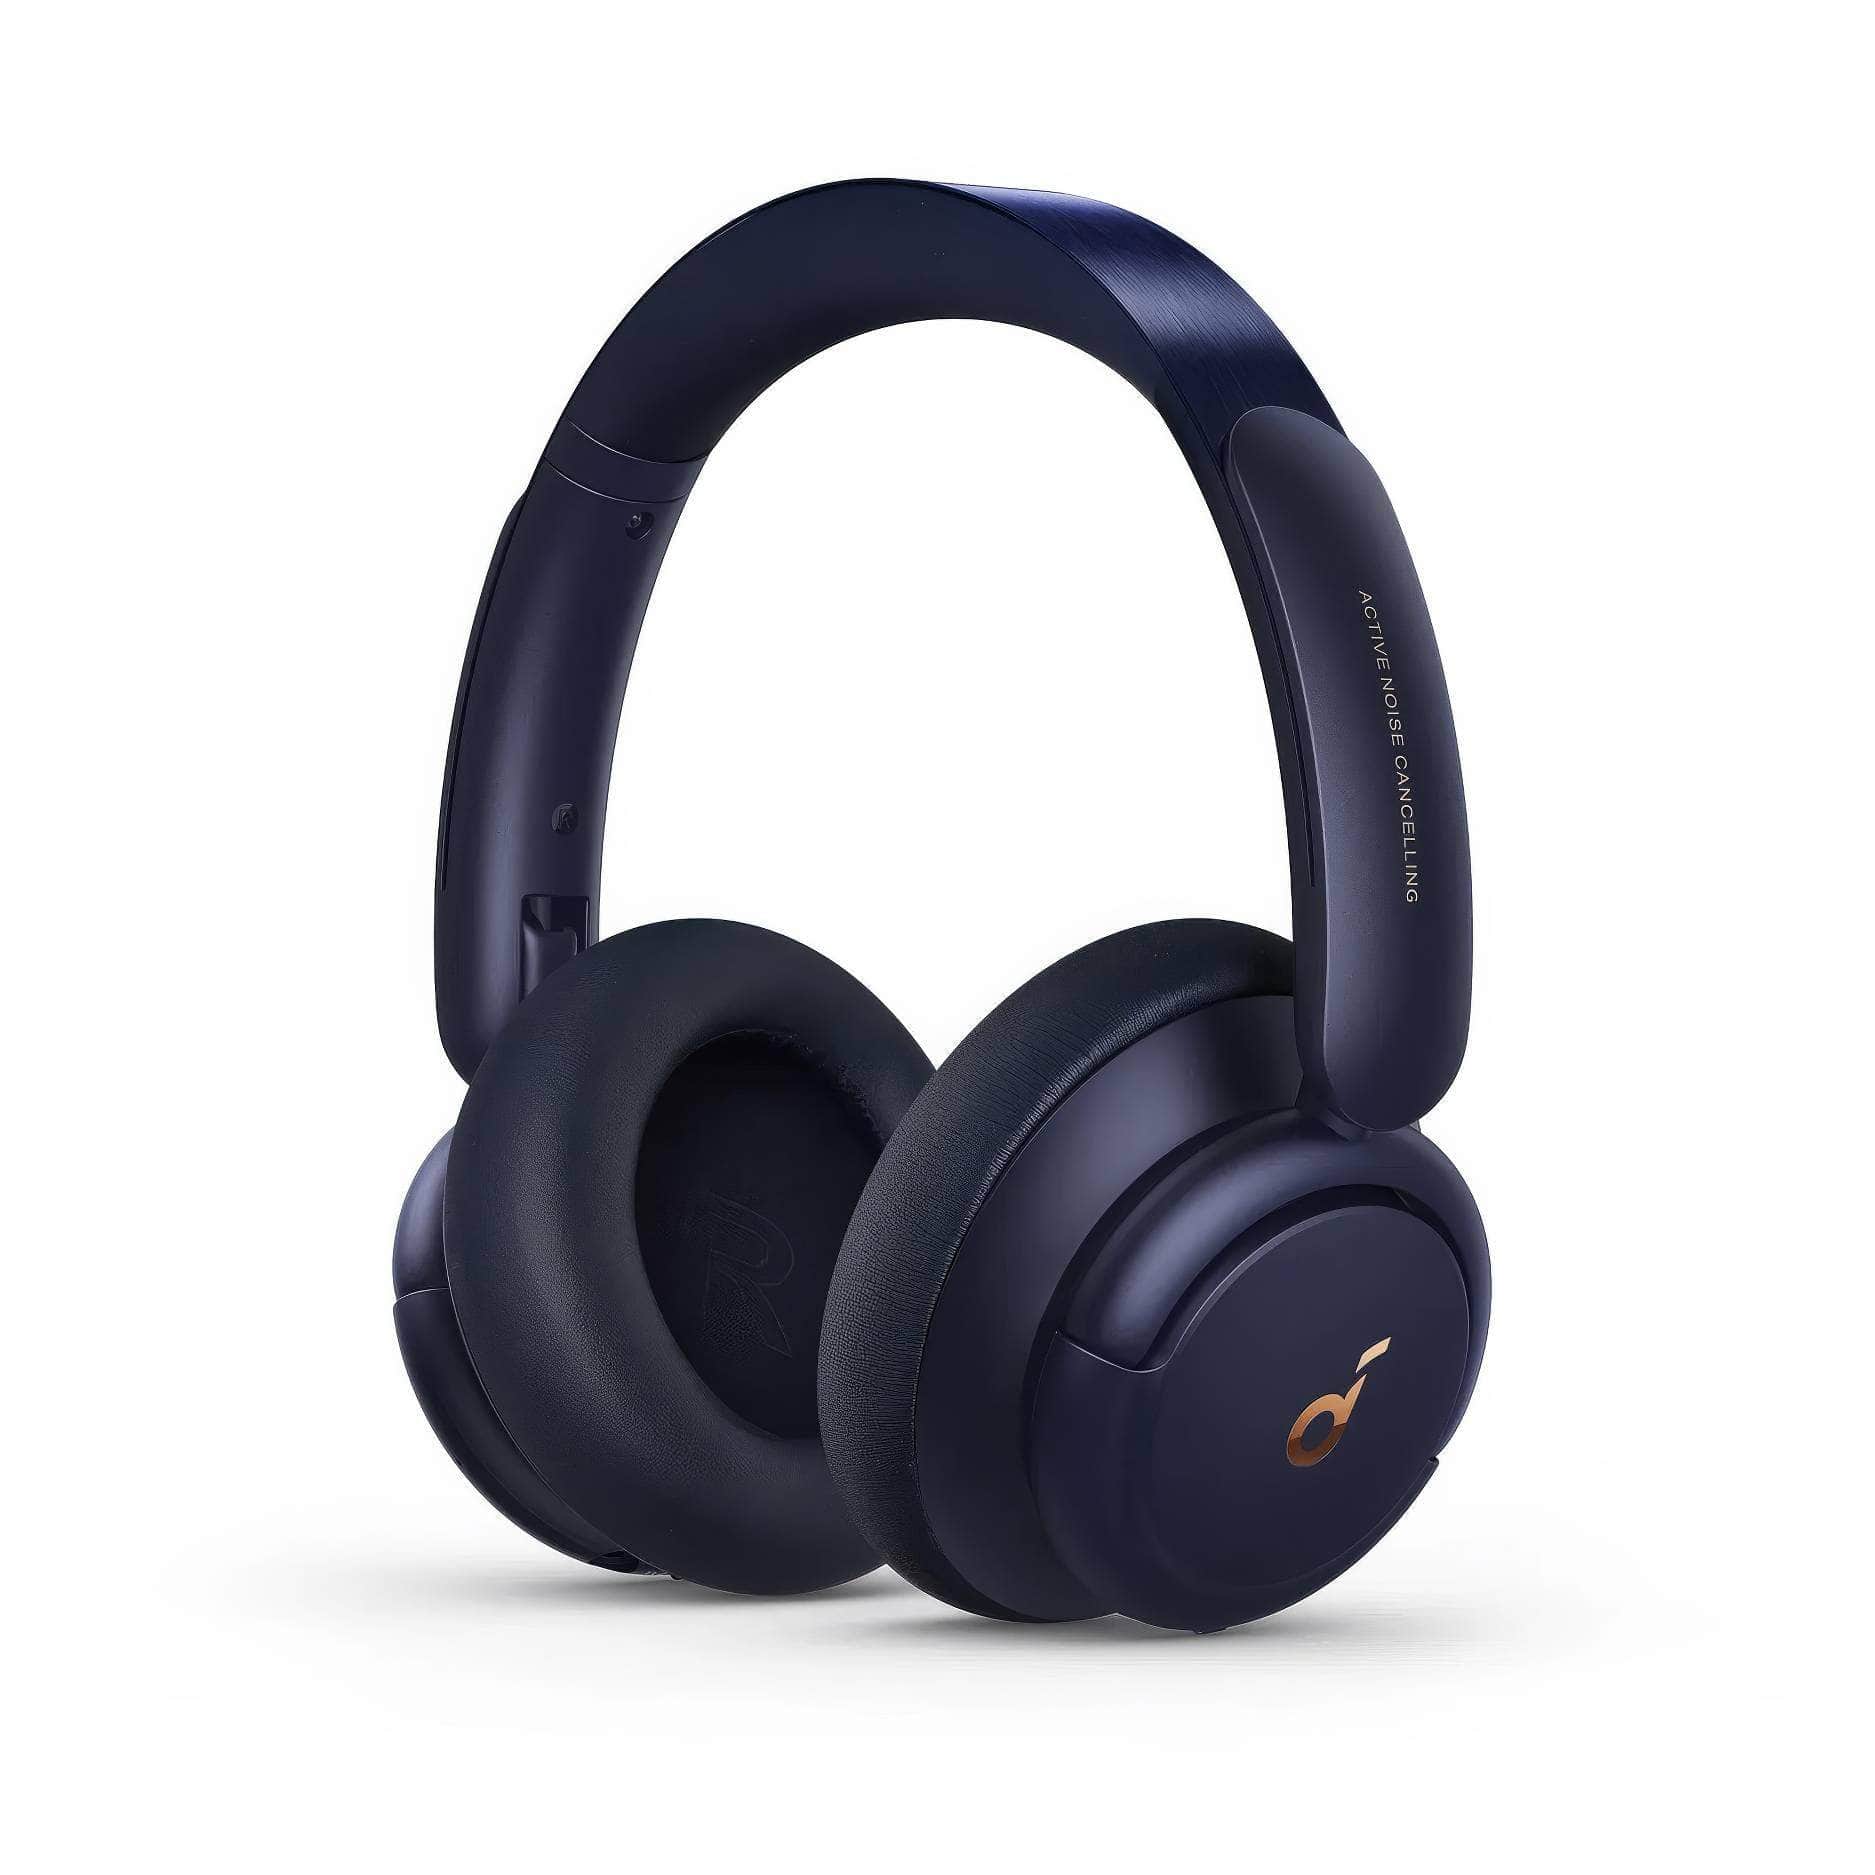 Anker Soundcore Life Q30 Hybrid Active Noise Cancelling Wireless Bluetooth Headphones - Multiple Modes, Hi-Res Sound, 40-Hour Battery Life Blue